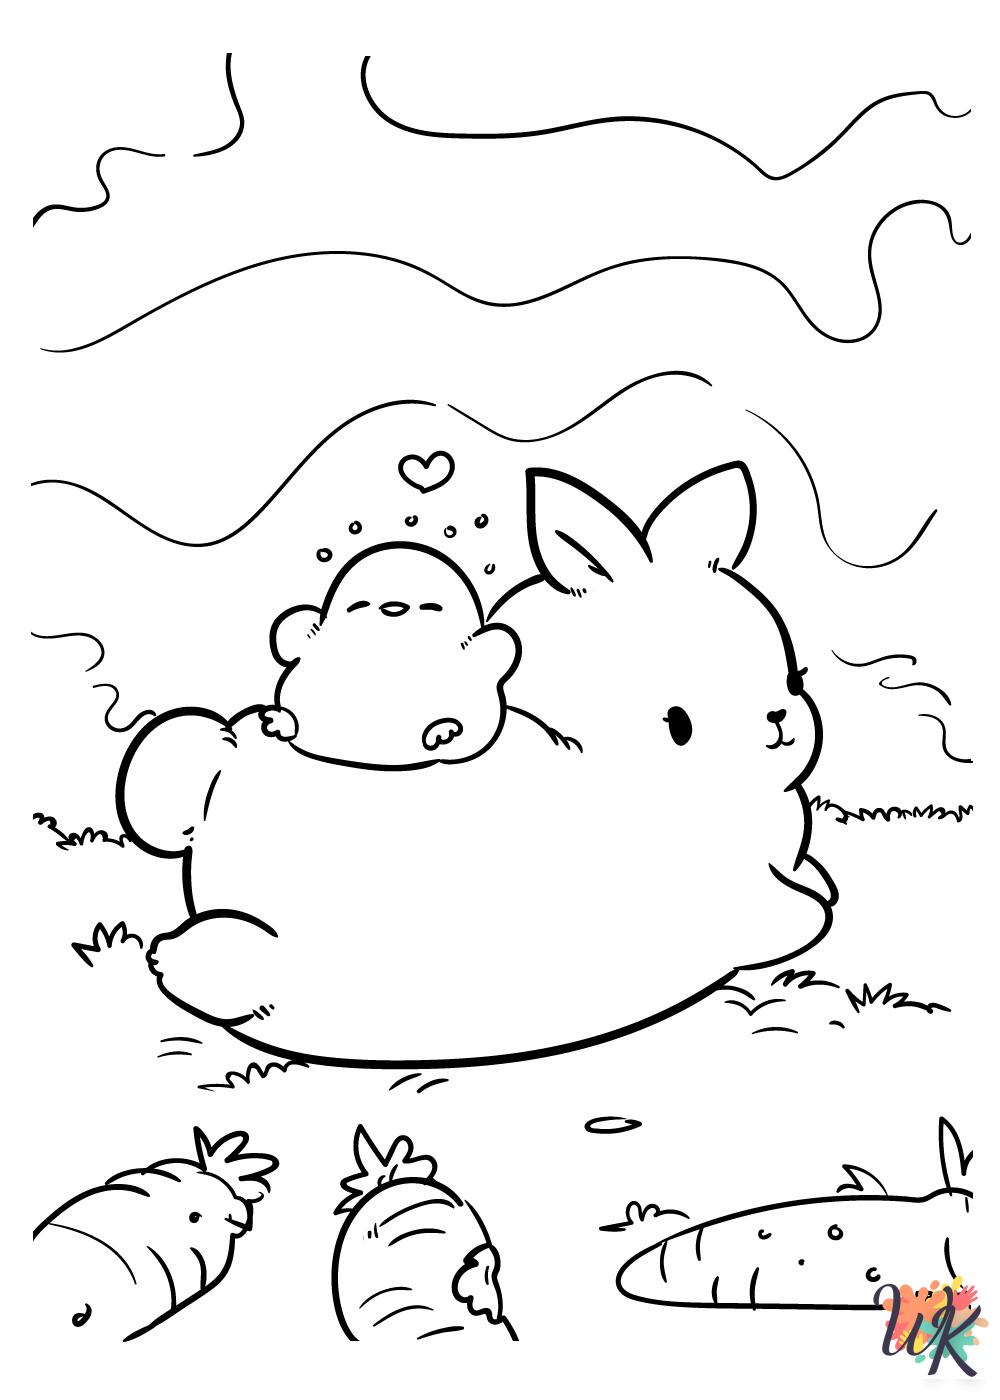 Cute Animals coloring pages free